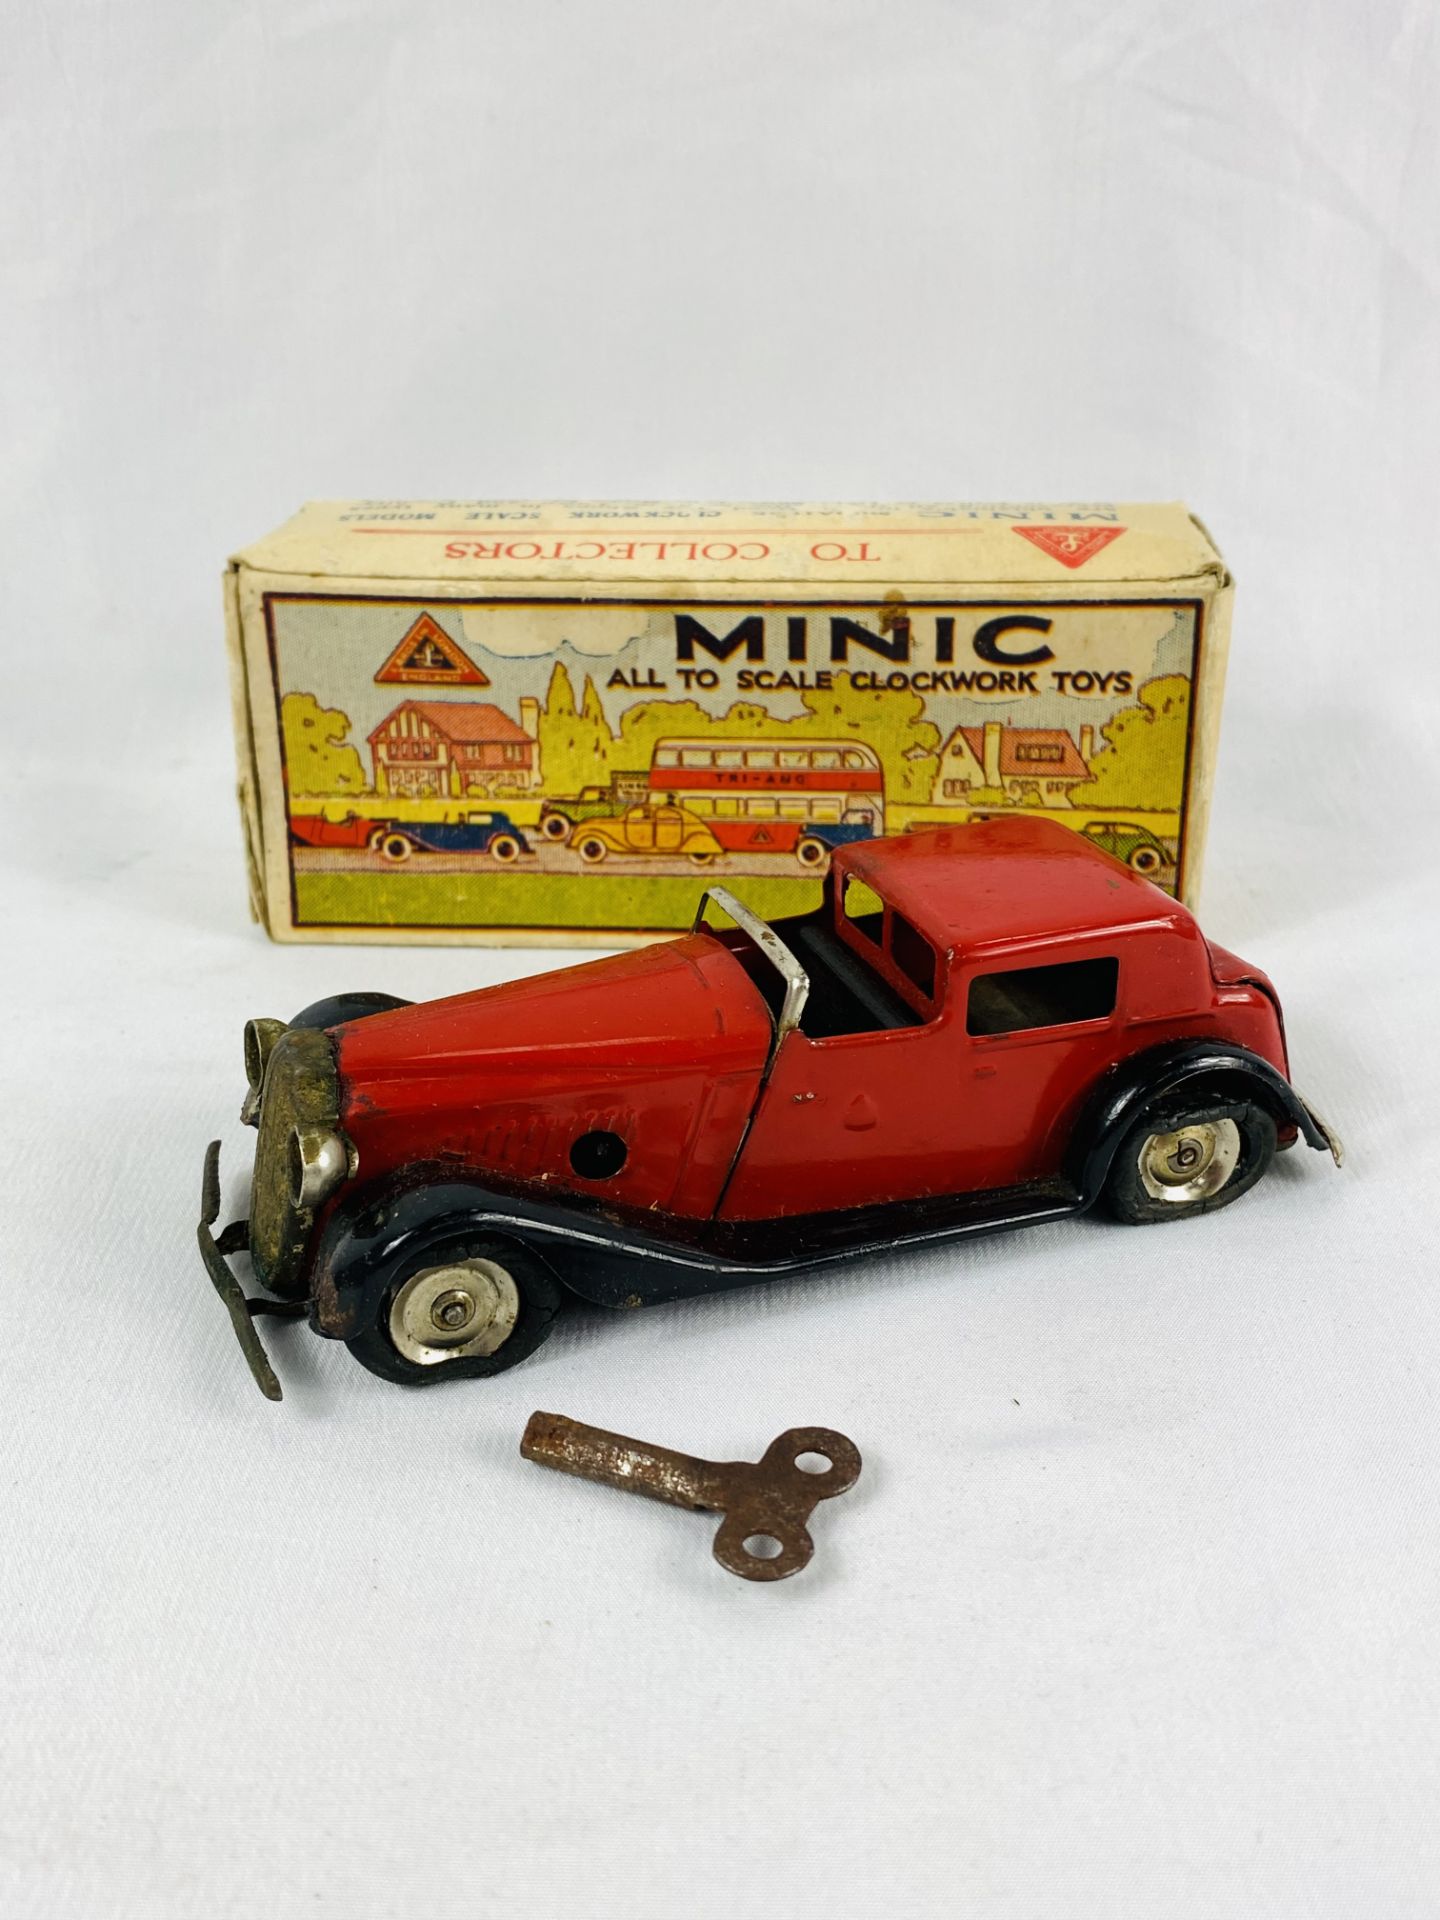 Triang Minic clockwork car with key, in original box - Image 2 of 3